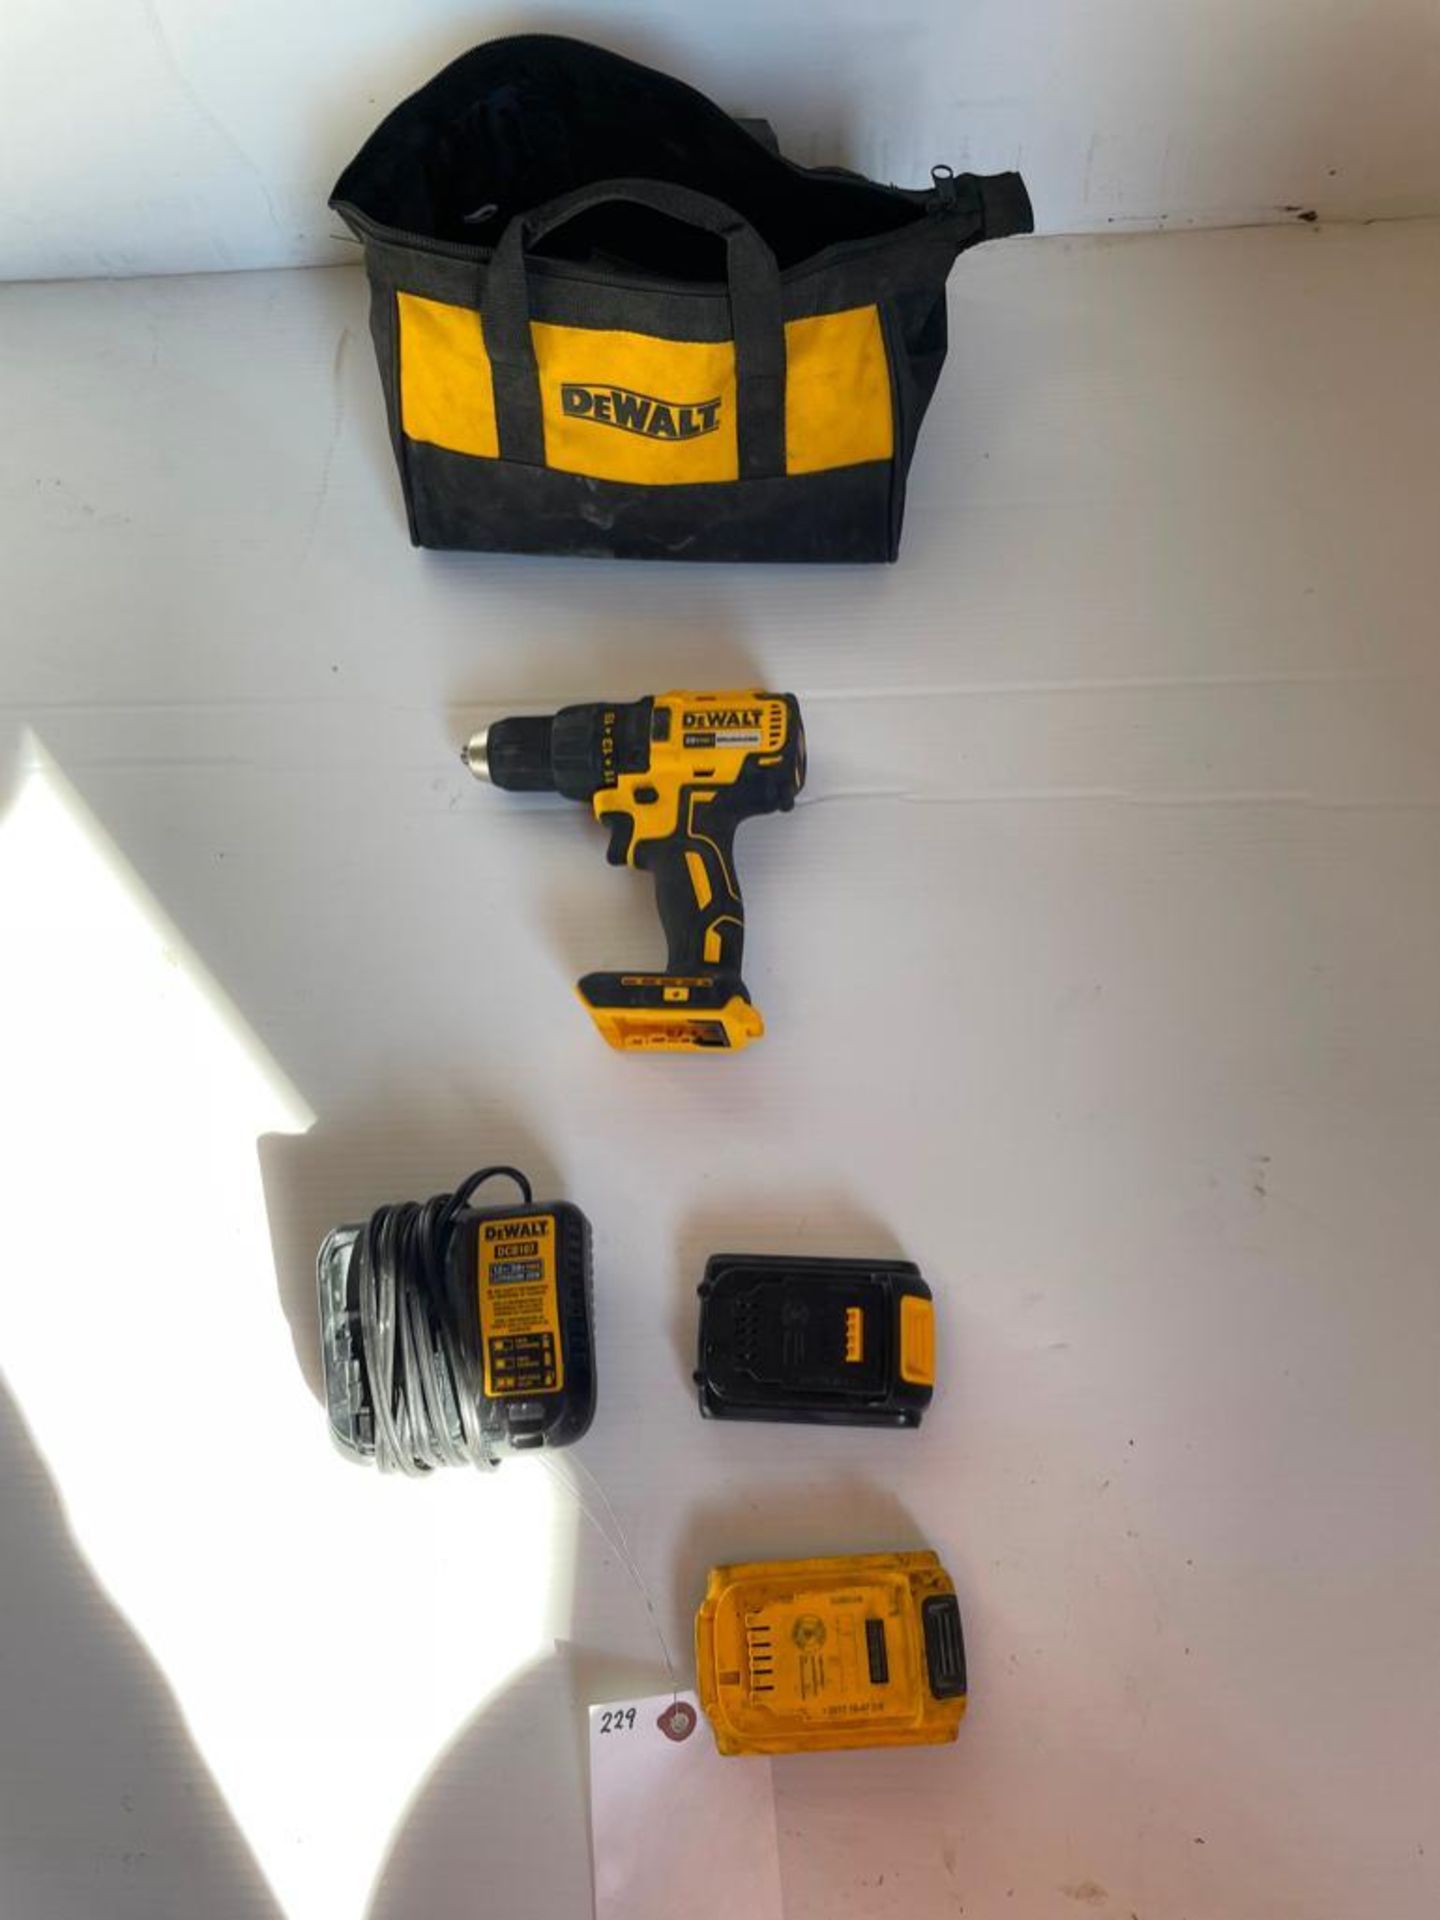 DeWalt DCD777 Cordless Drill Driver 1/2" with Battery, Charger & Case. Located in Hazelwood, MO - Image 2 of 8